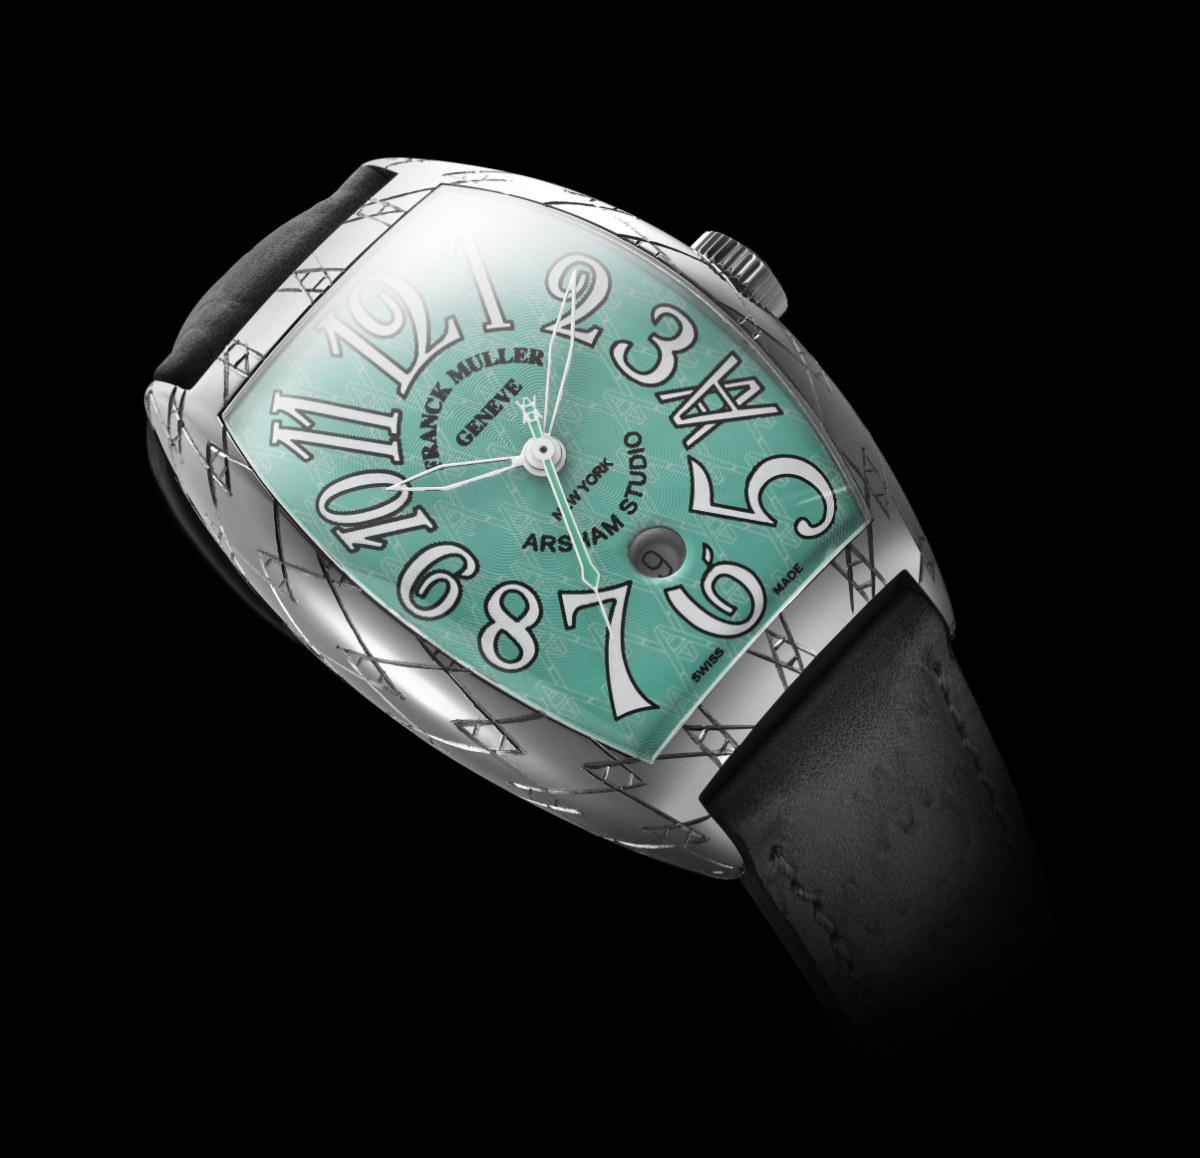 Casablanca - A New Limited Watch Edition From Franck Muller